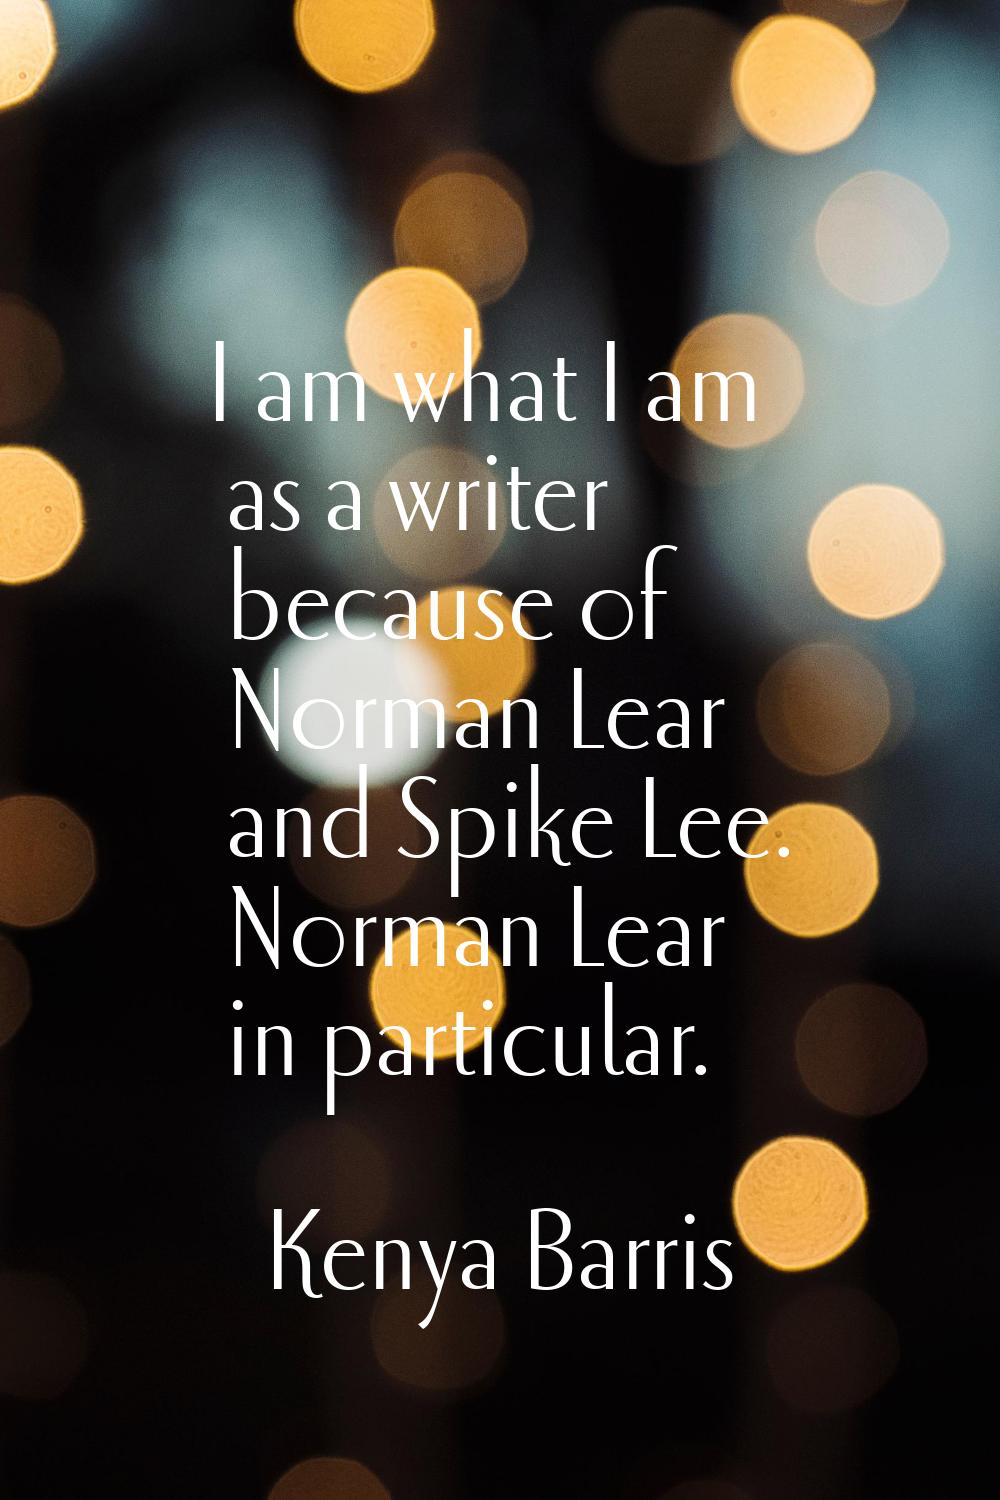 I am what I am as a writer because of Norman Lear and Spike Lee. Norman Lear in particular.